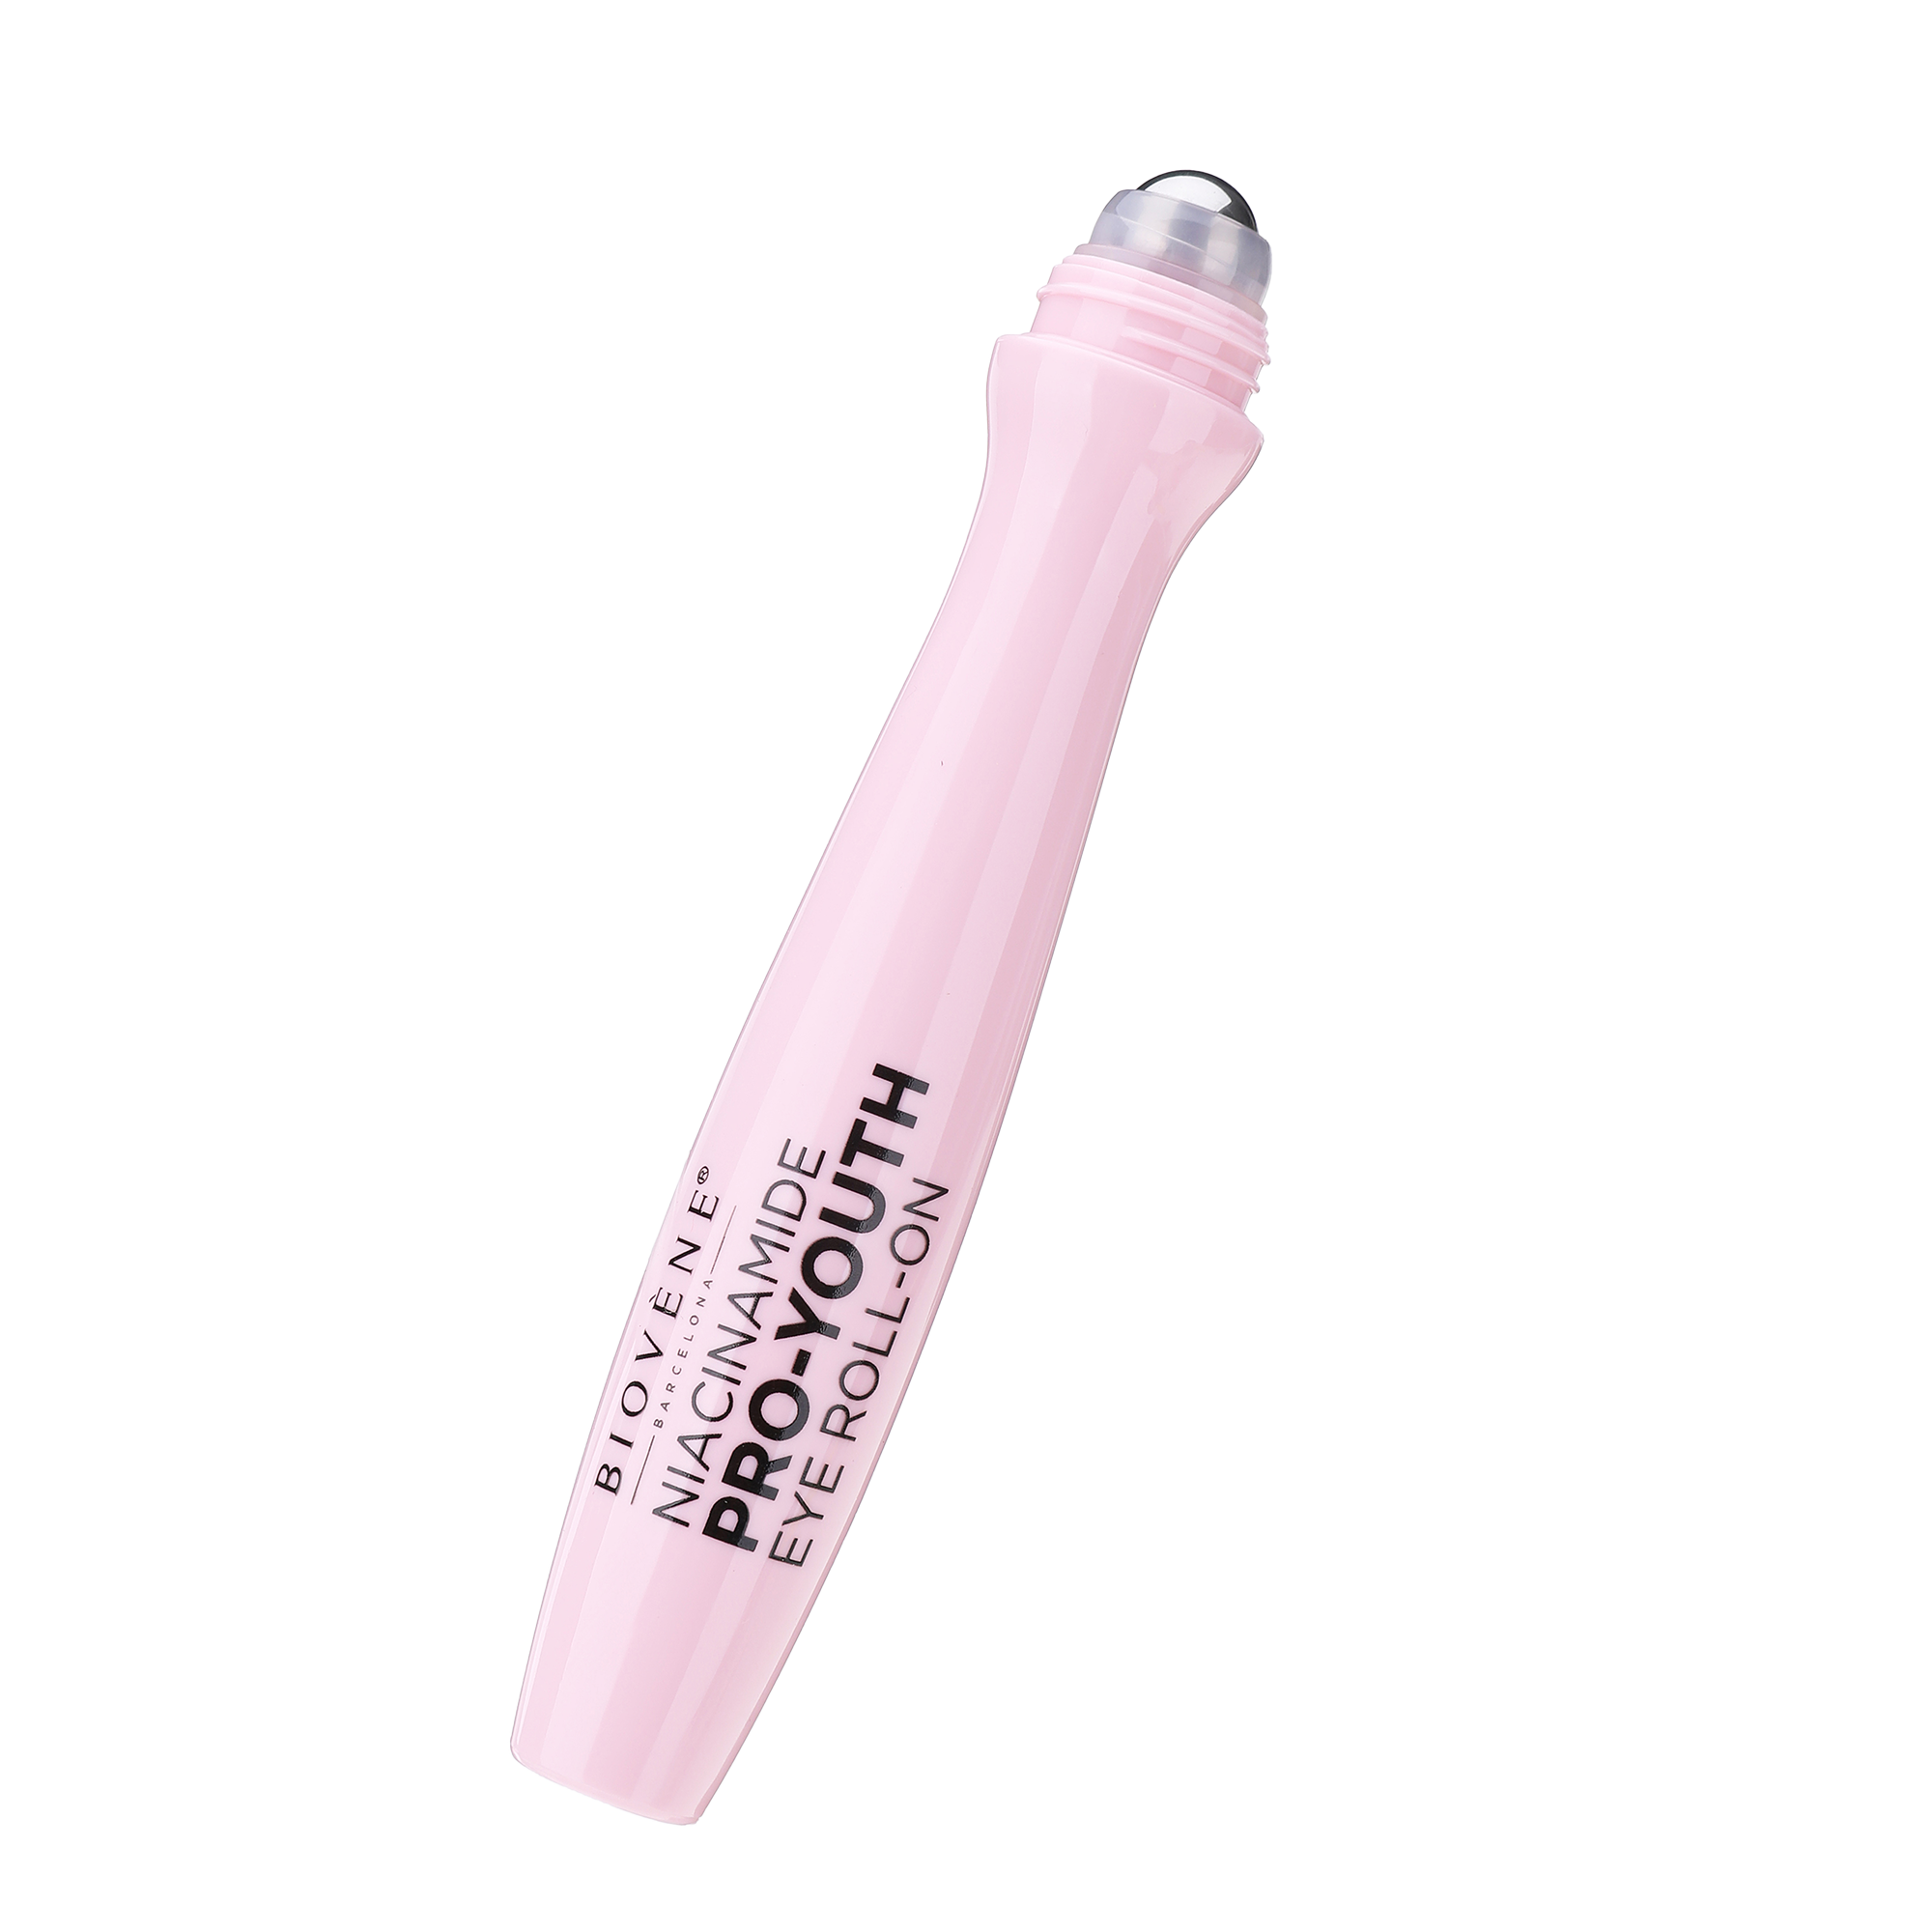 NIACINAMIDE PRO-YOUTH Revitalizing Eye Roller with Anti-Aging Peptides &amp; Niacinamide